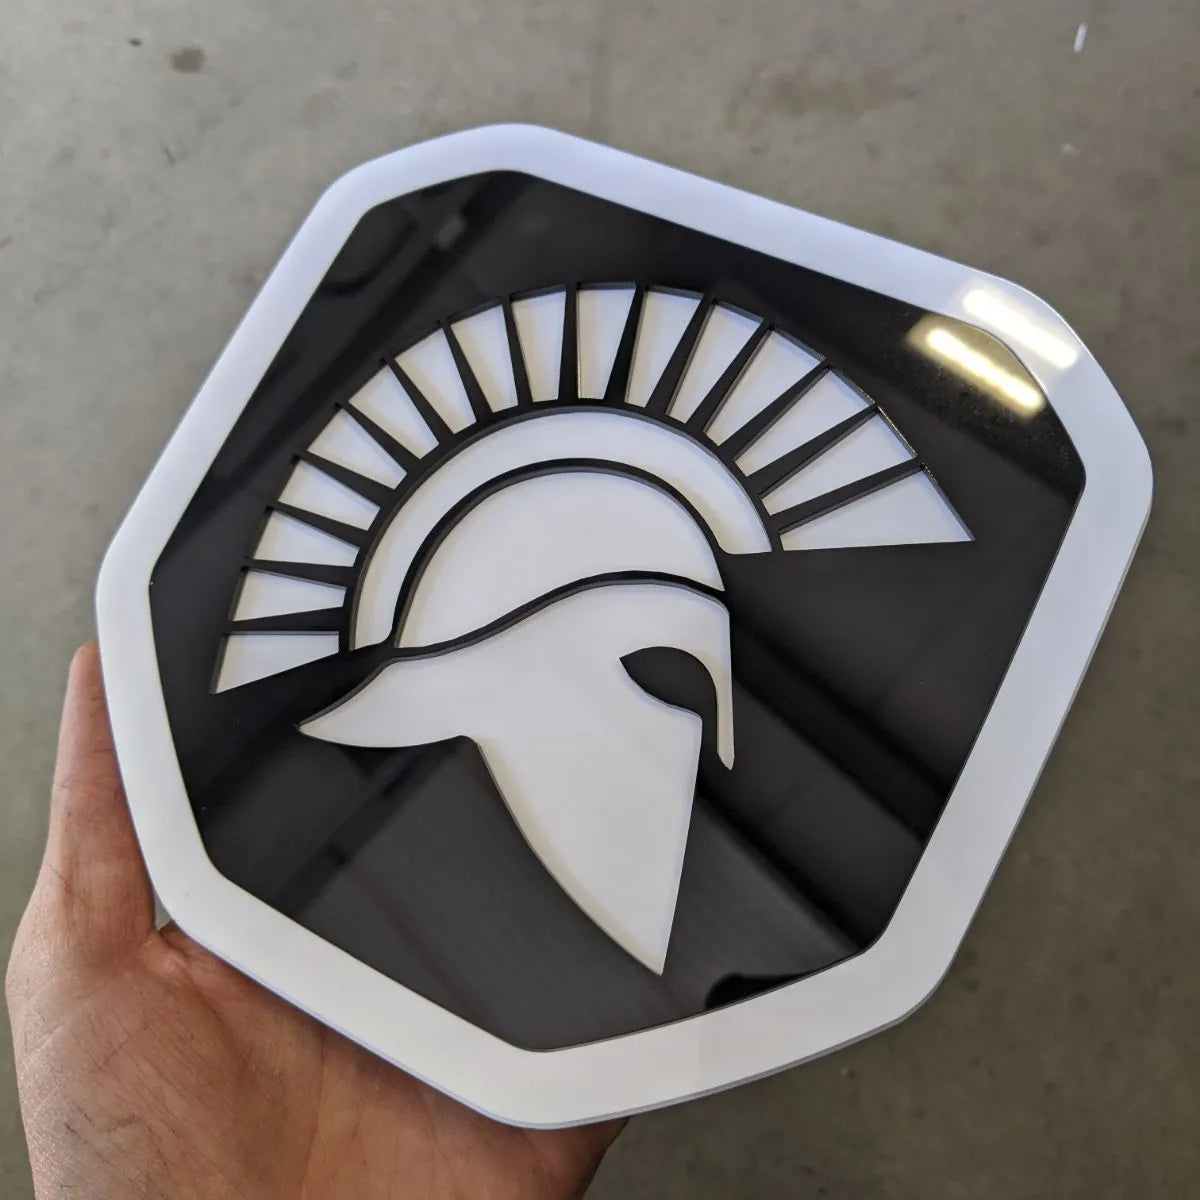 Spartan Badge - Fits 2019+ (5th Gen) Dodge® Ram® Tailgate -1500, 2500, 3500 - White and Black